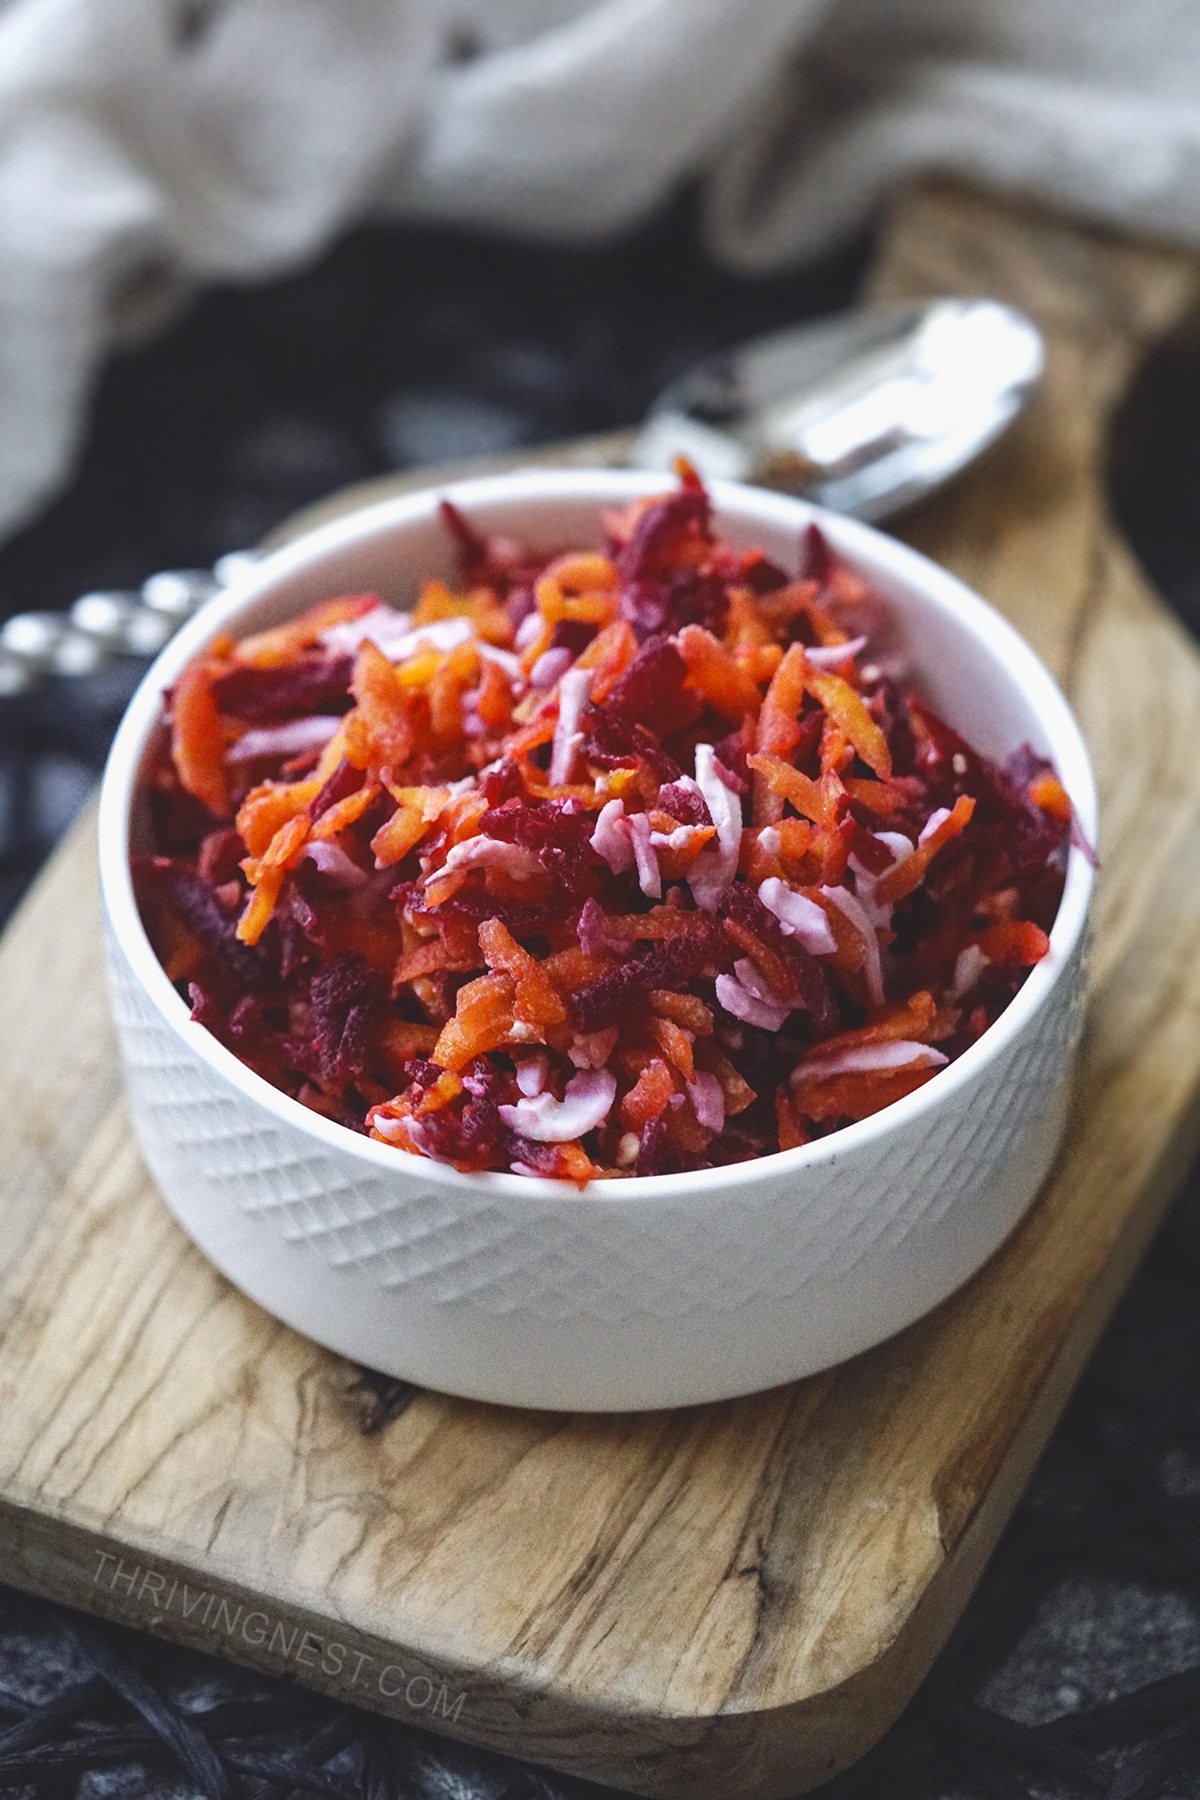 Kid and baby friendly salad with cooked carrots, beets, eggs all grated and mixed with lemon juice and salt.